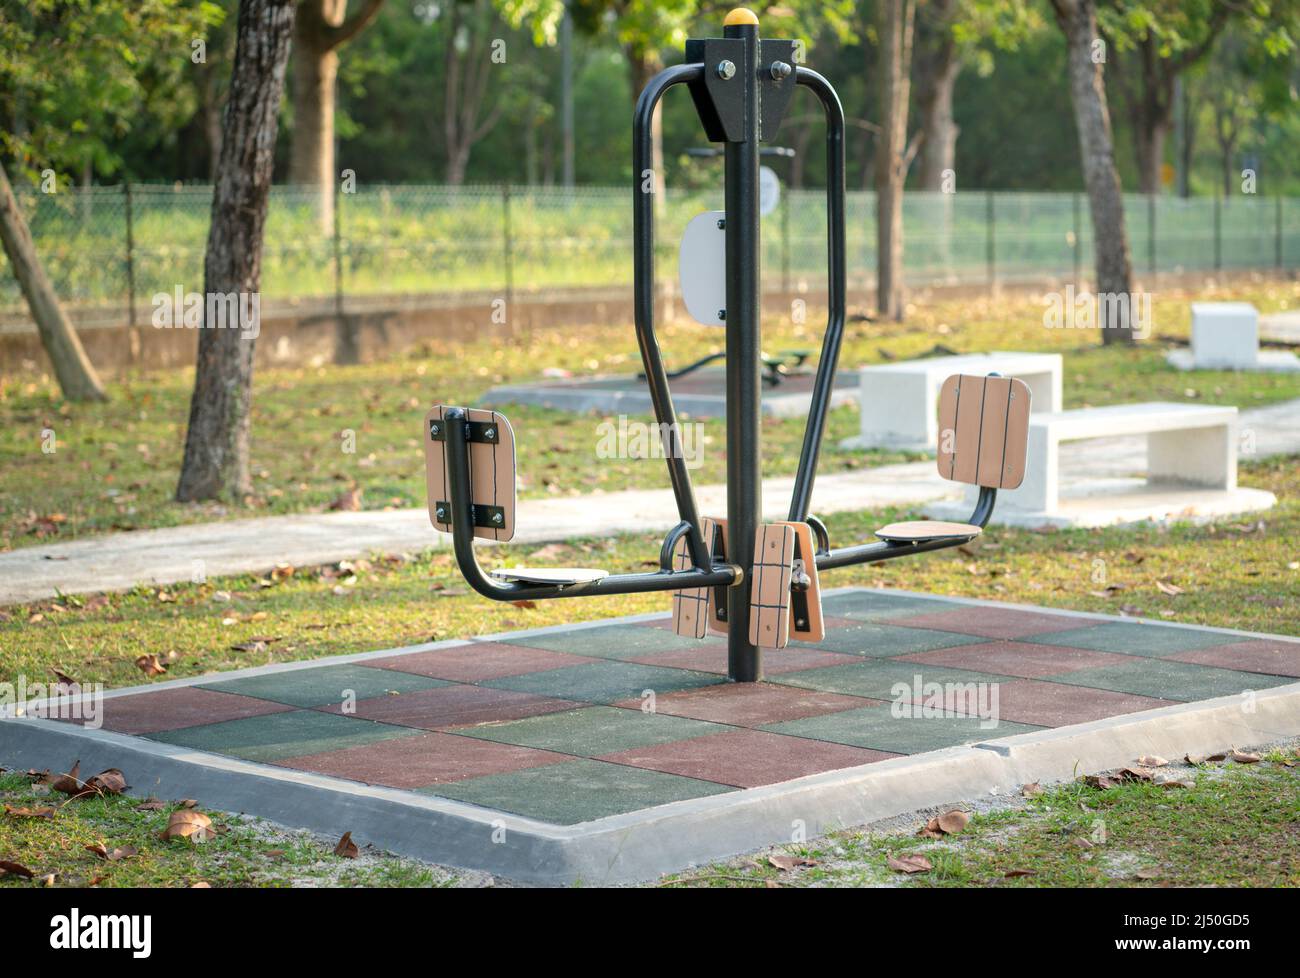 Exercise or fitness equipment outdoor, in the park. Sports workout or outdoor gym concept. Stock Photo